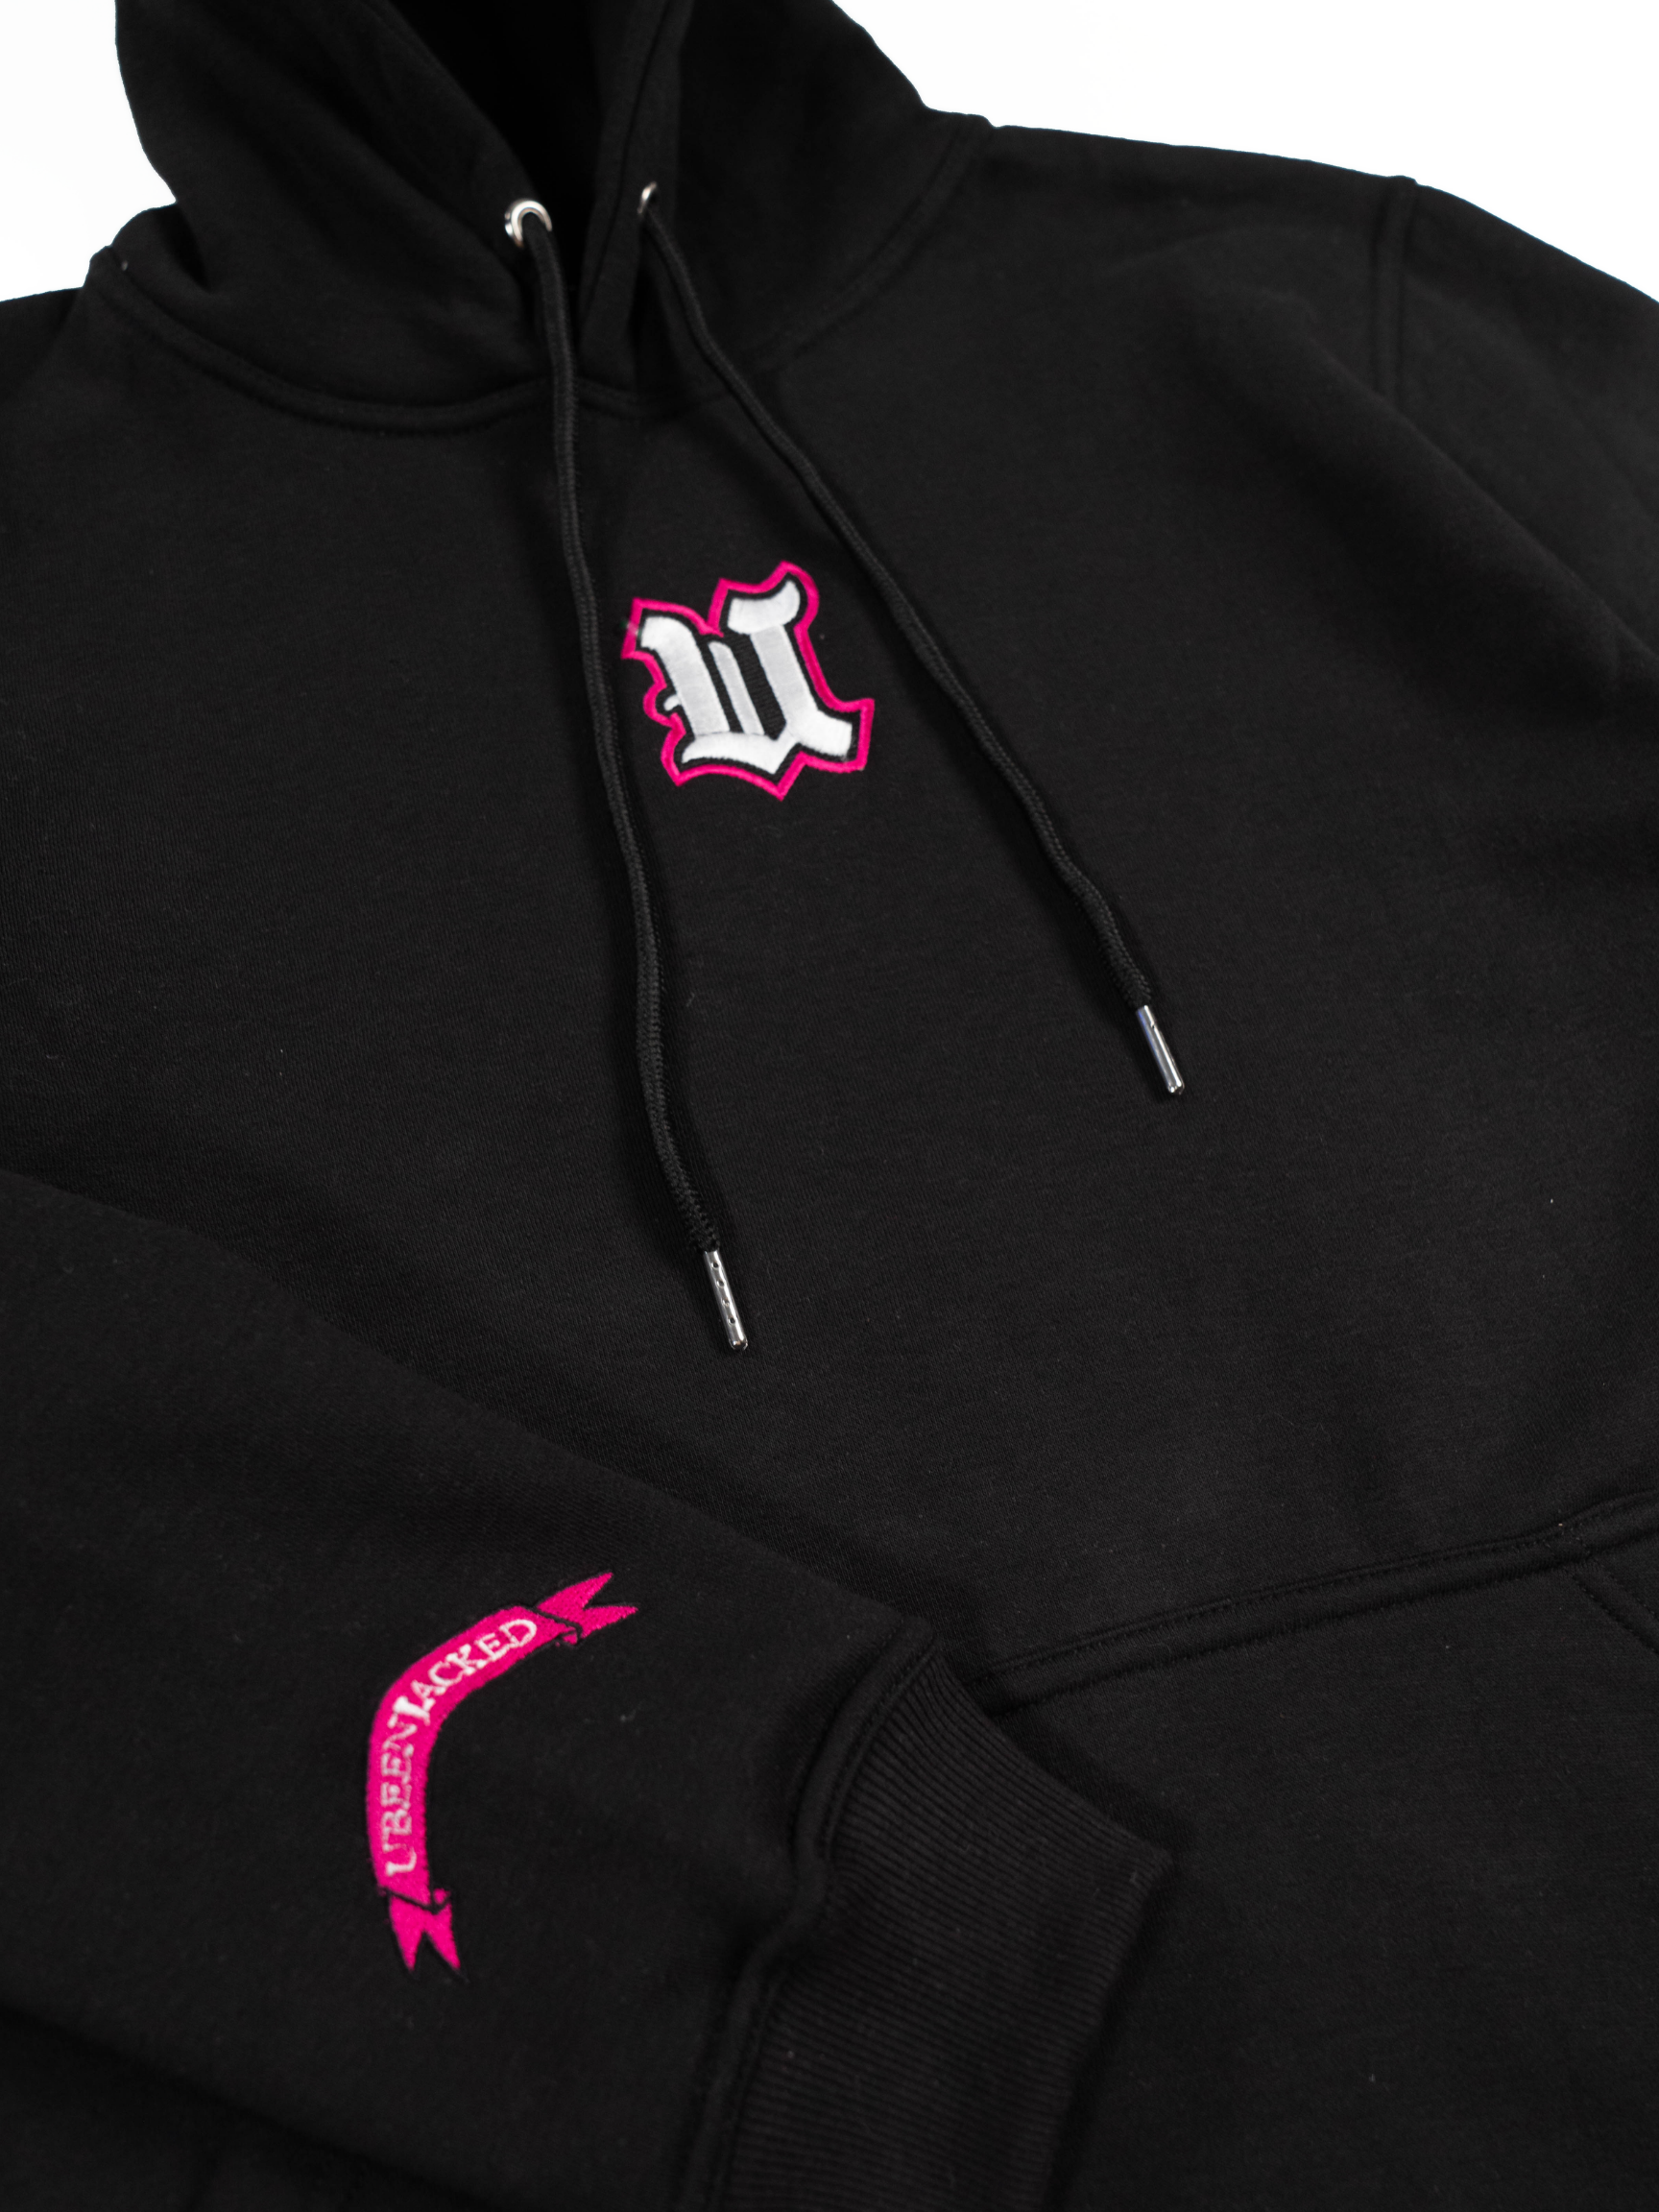 DCDCT Black Hoodie close up embroidery